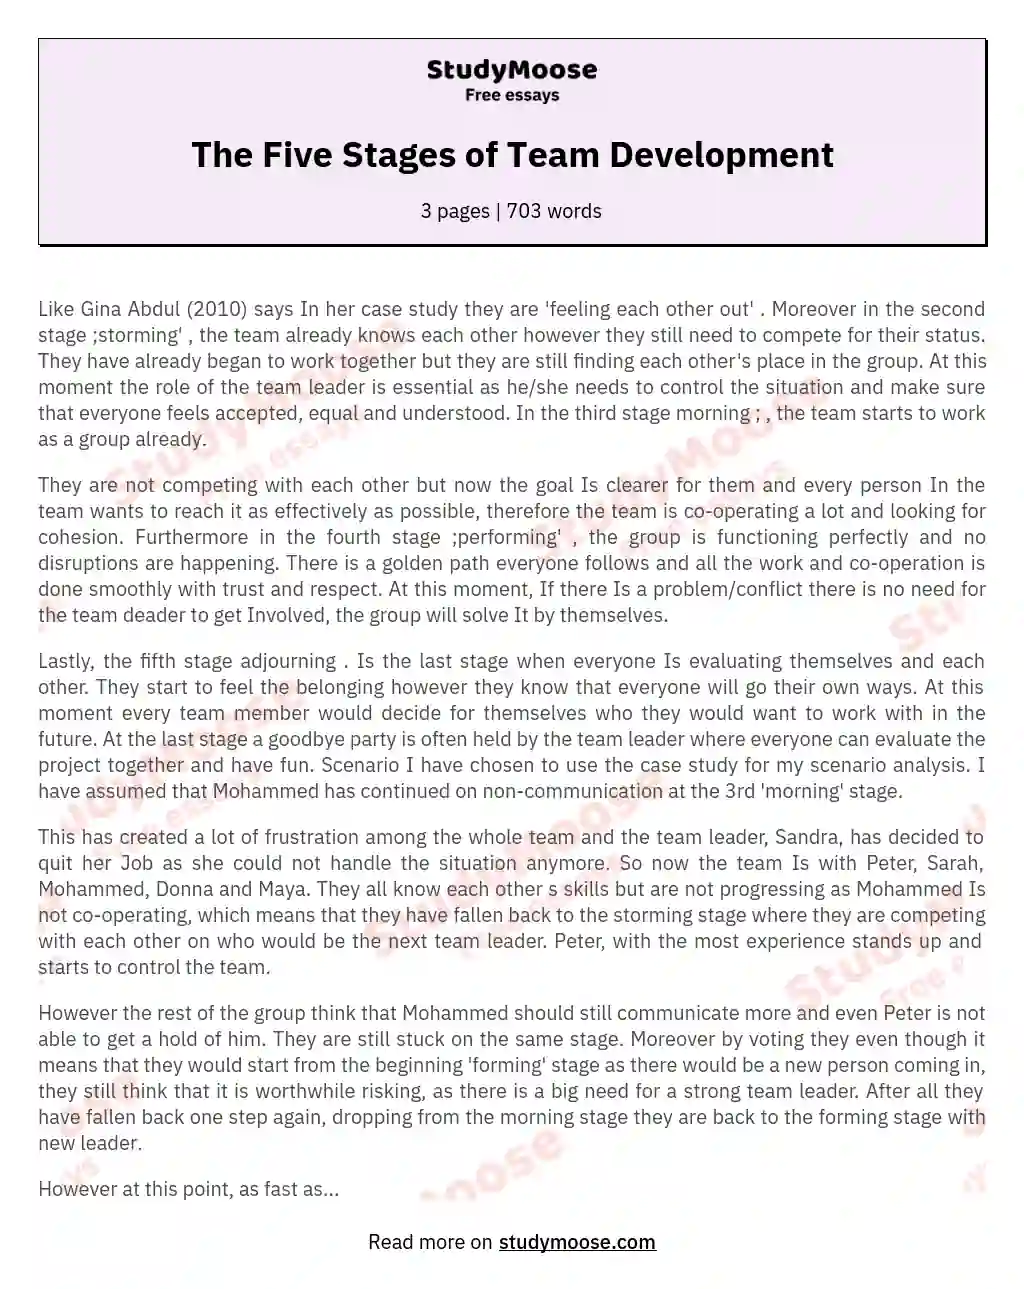 The Five Stages of Team Development essay